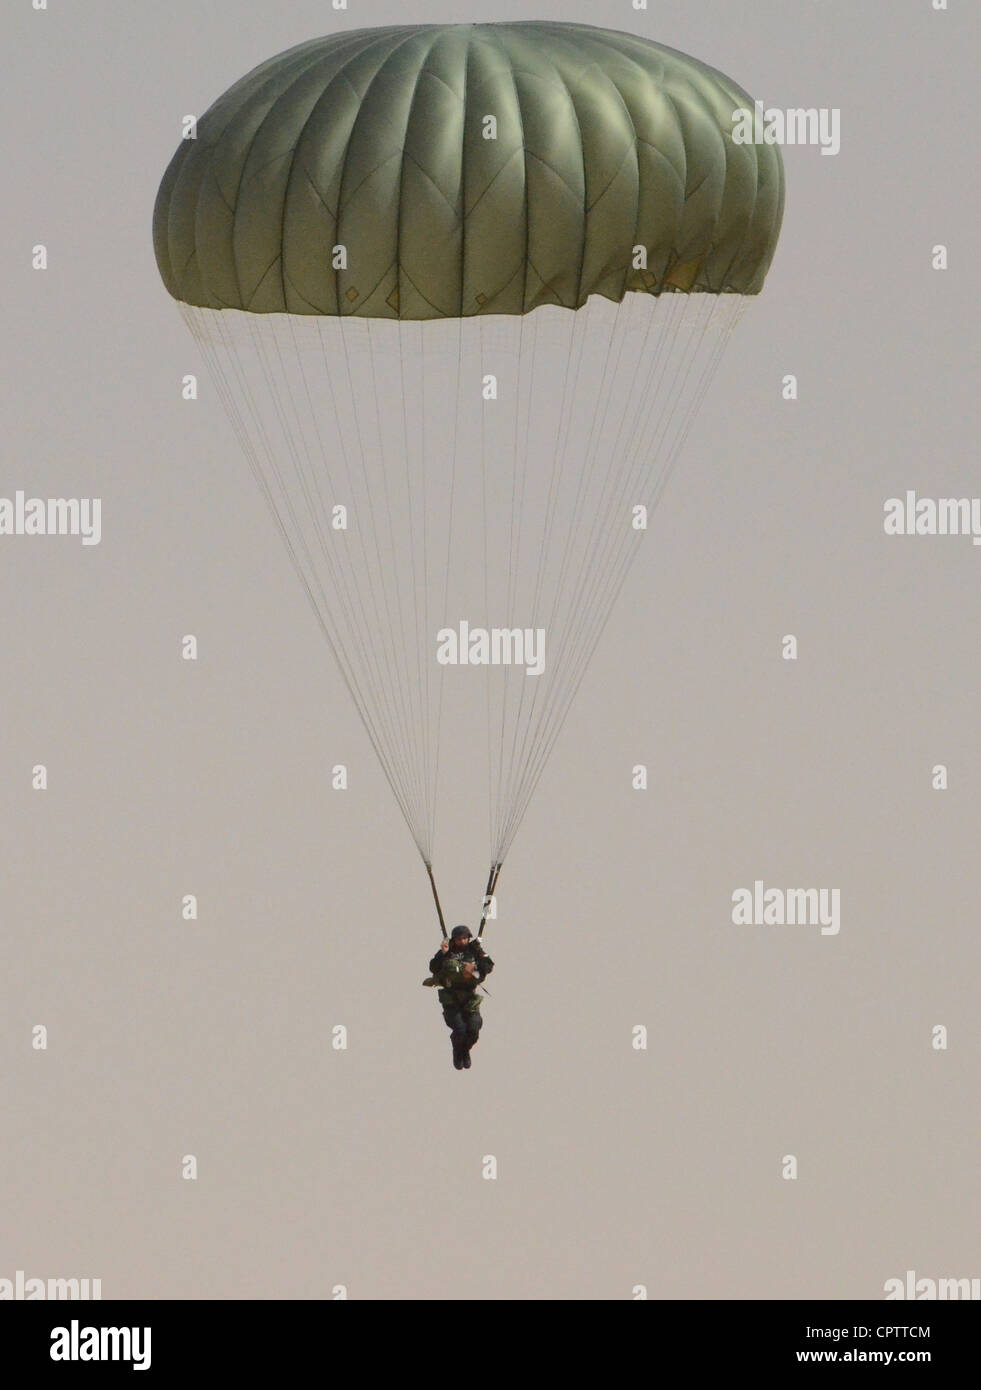 Jordanian soldier parachutes safely into the drop zone after completing his static line jump at the Exercise Eager Lion 2012 friendship jump to help kick start the multilateral exercise. The focus of Eager Lion 2012 is to strengthen military-to-military relationships of participating partner nations. The friendship jump is the first step in accomplishing this goal as parachutists from Combined Joint Task Force Spartan jumped together. Stock Photo